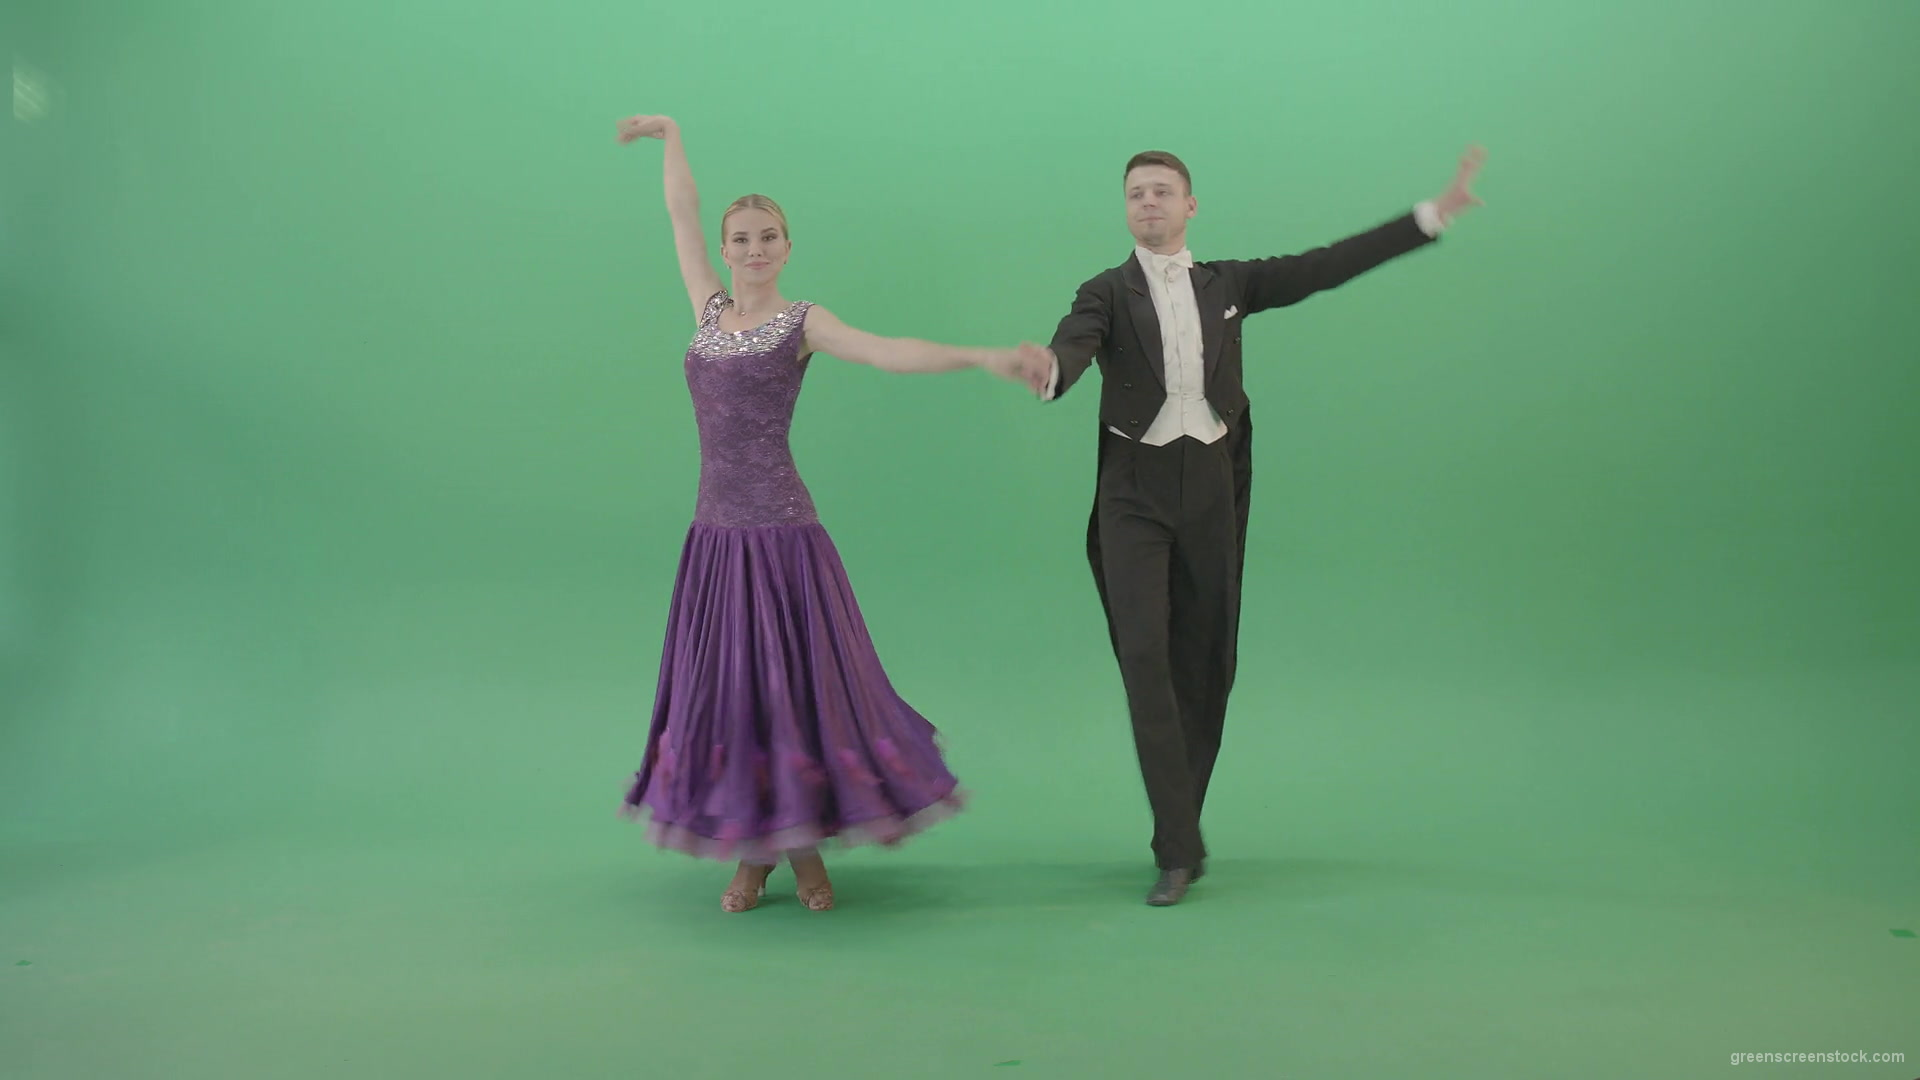 Ballroom-dance-couple-on-green-screen-makes-open-up-reverence-4K-Video-Footage-1920_004 Green Screen Stock